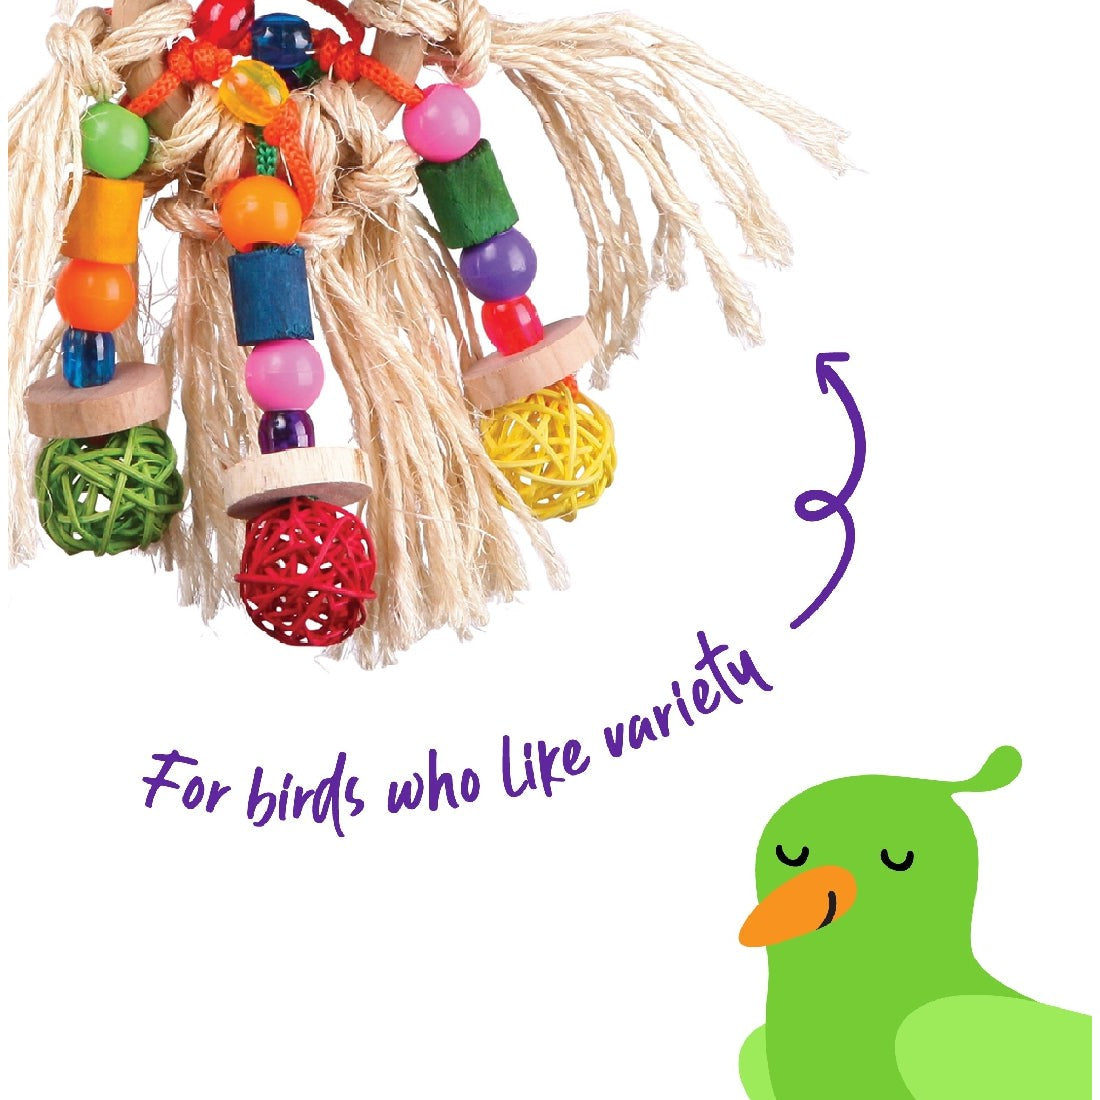 Colorful bird toy with beads, ropes, and wicker balls.